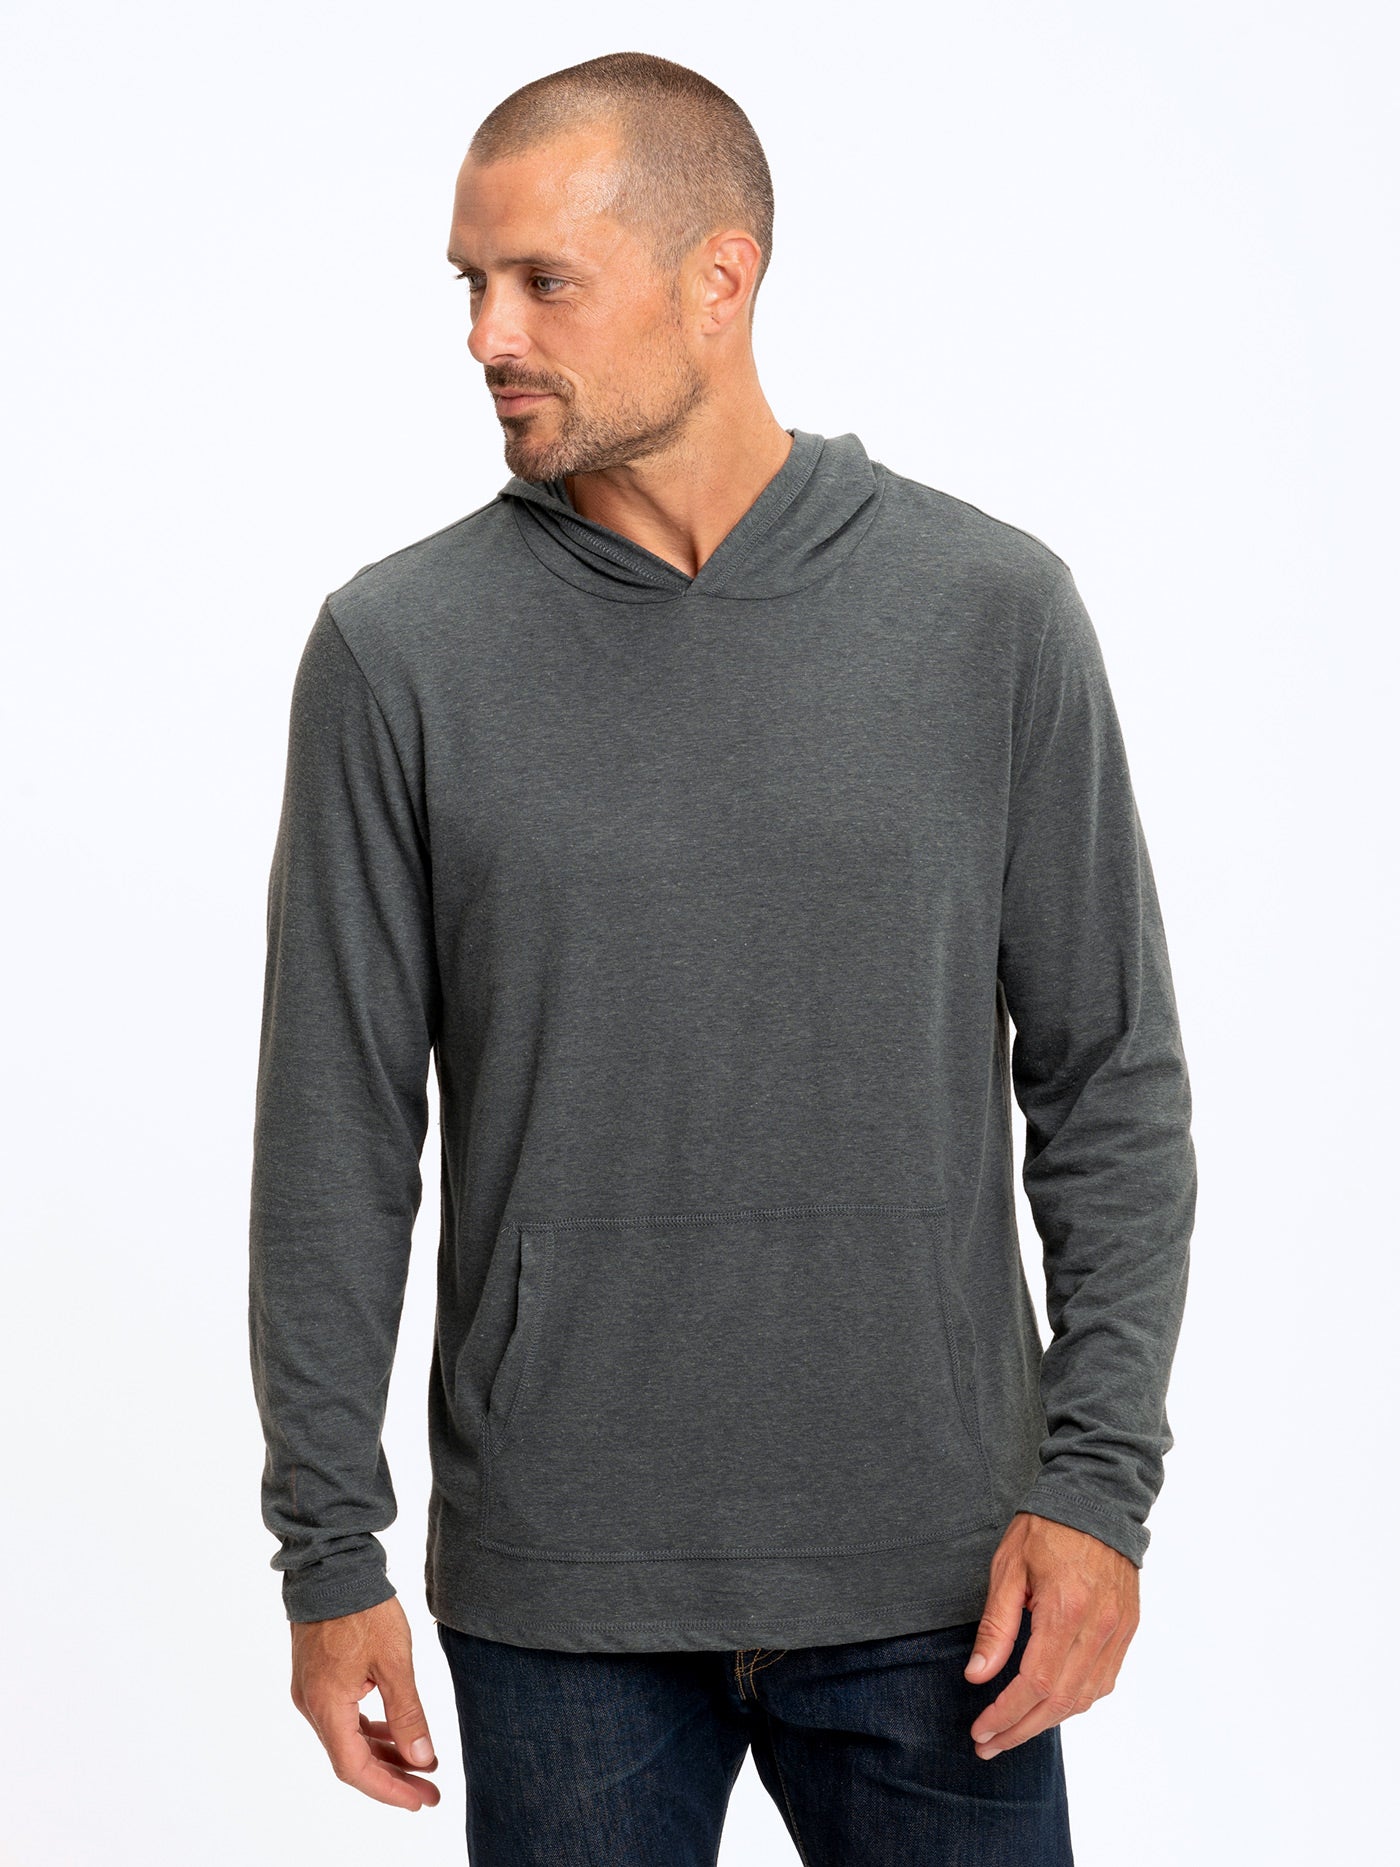 Threads 4 Thought Pullover Hoodie in Gunmetal at Nordstrom, Size XX-Large